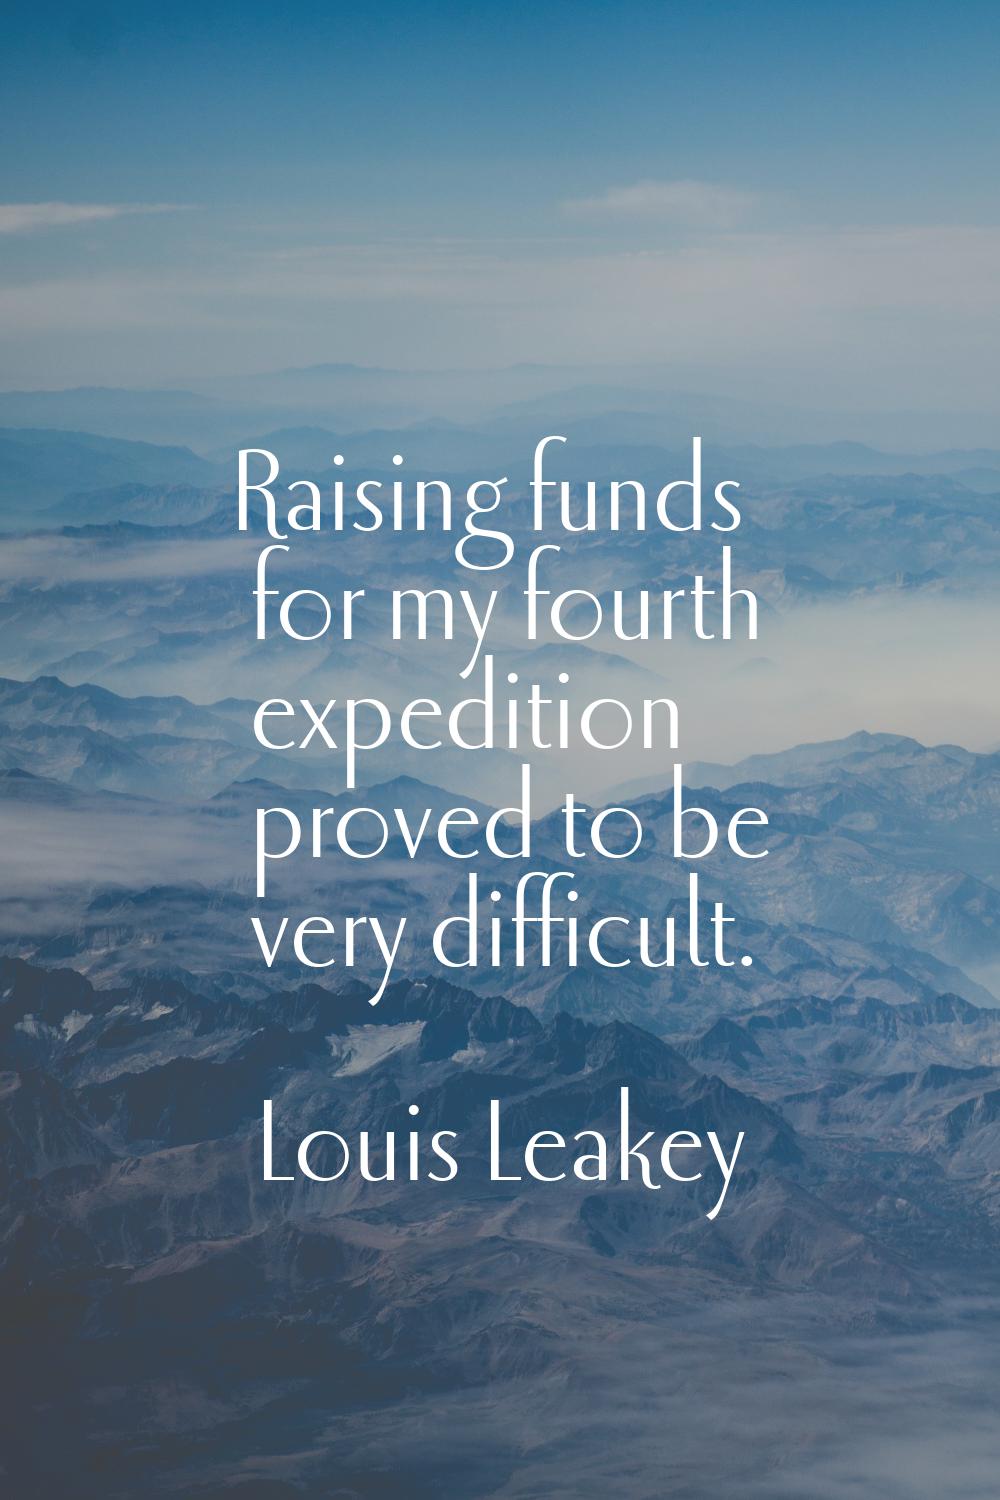 Raising funds for my fourth expedition proved to be very difficult.